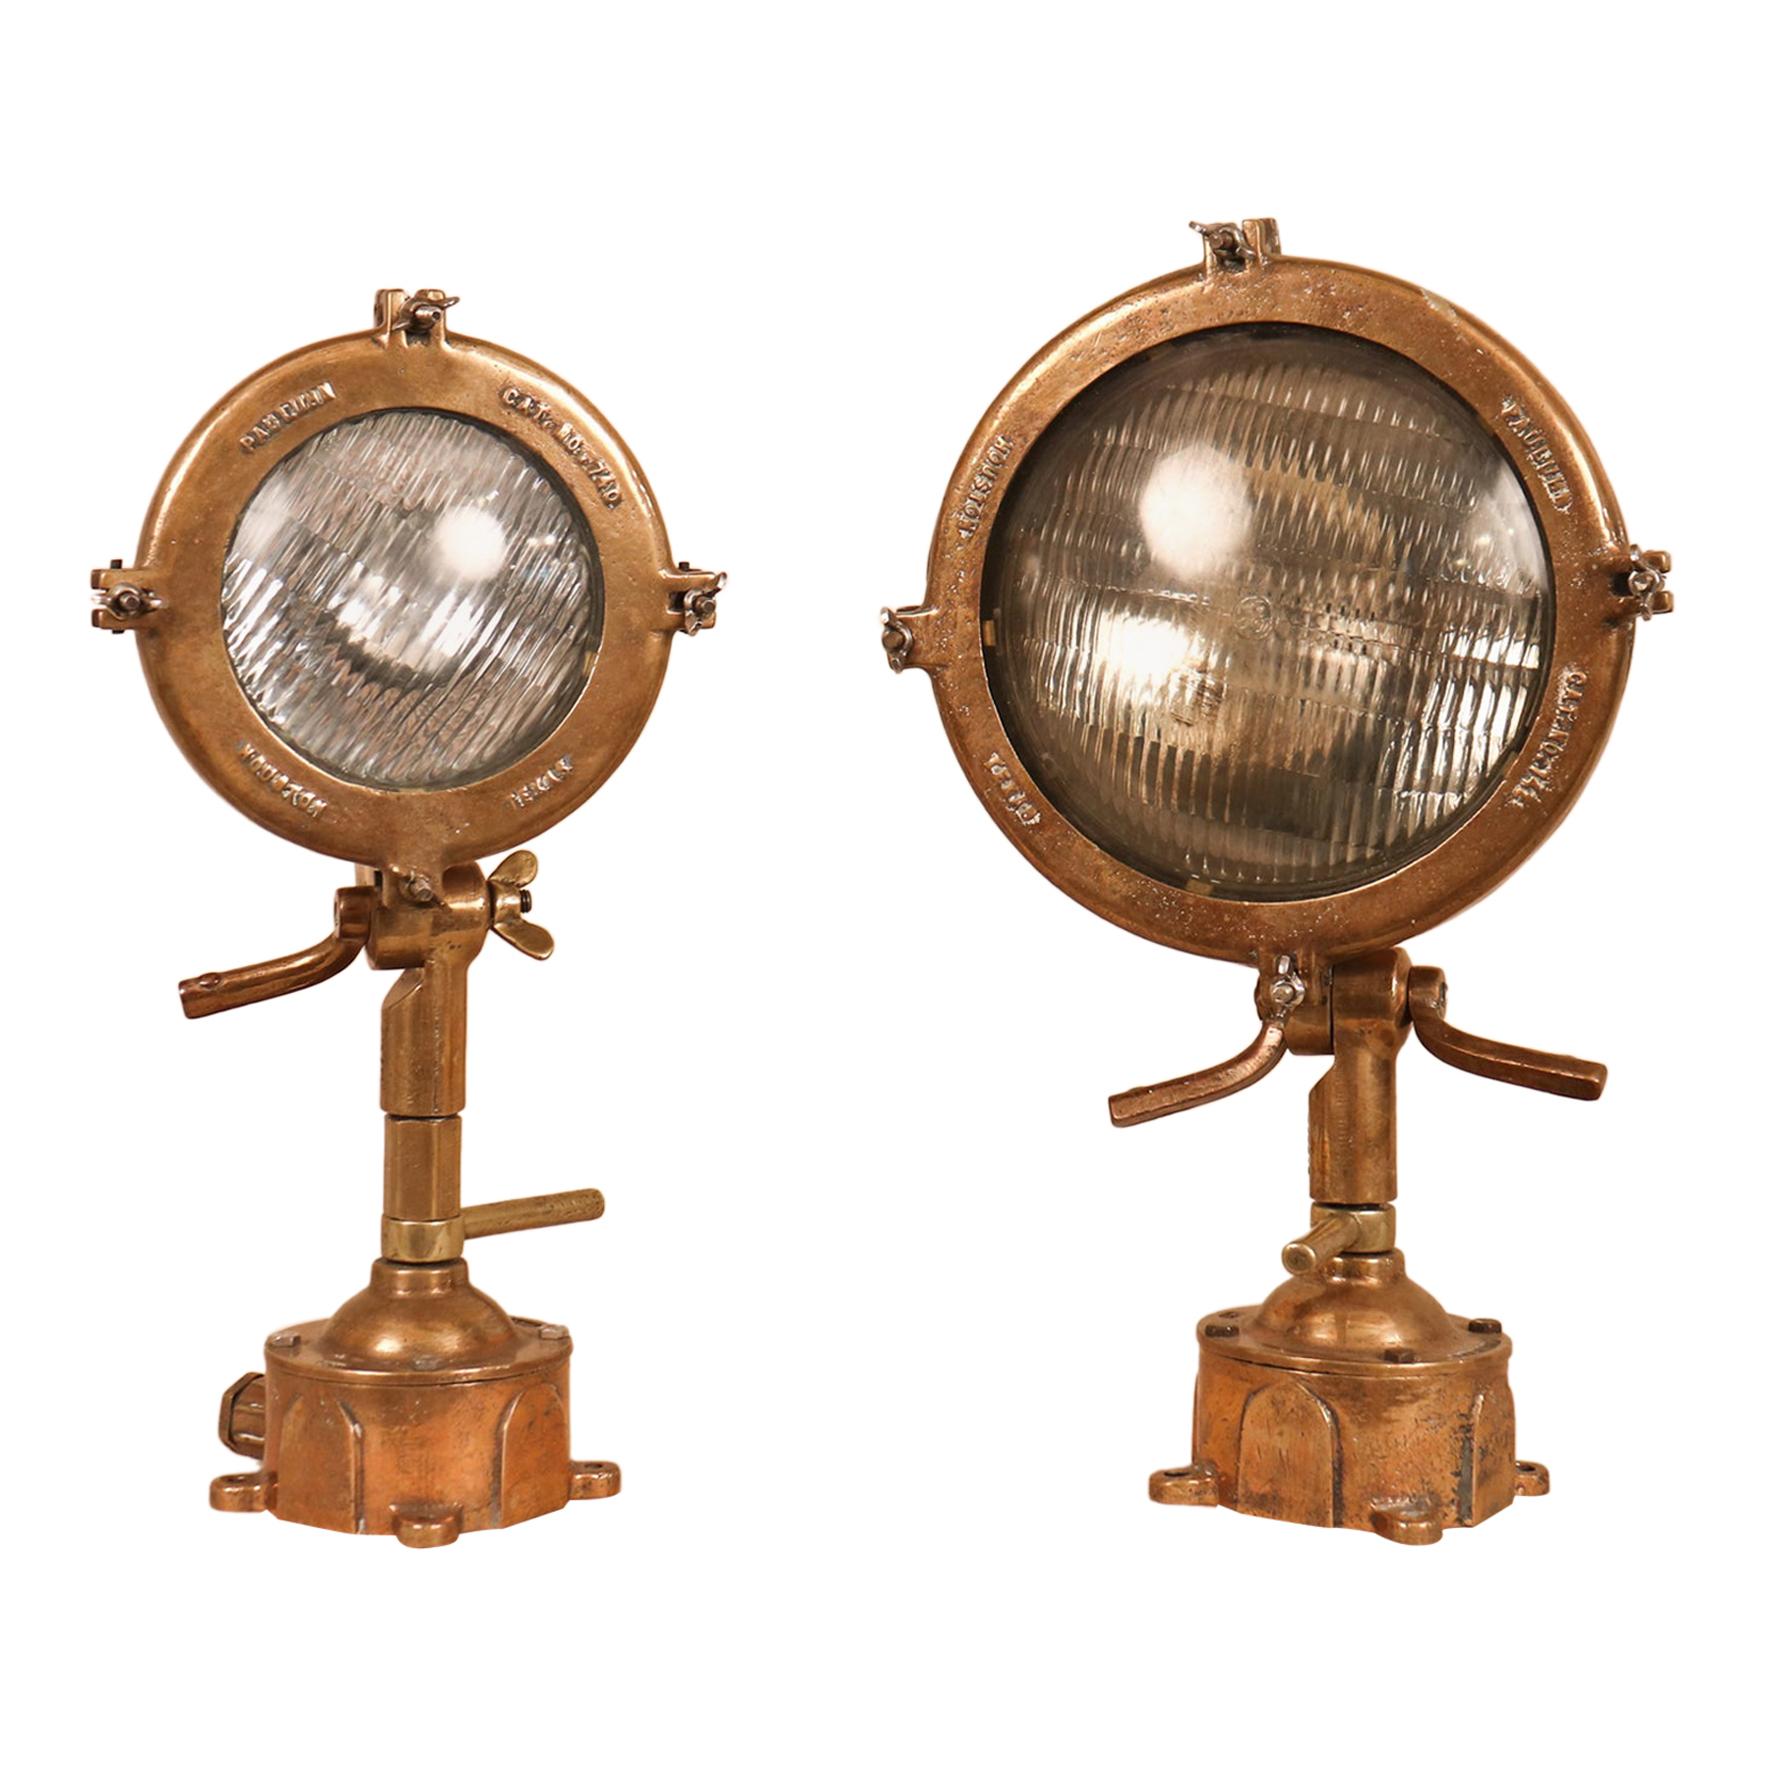 A set of 1960s solid brass maritime spotlights manufactured by Eaton Crouse-Hinds, Houston, TX. These Pauluhn big and little sister lanterns (series 740 and 742) feature adjustable, incandescent lamps and heat resistant glass. The lights come